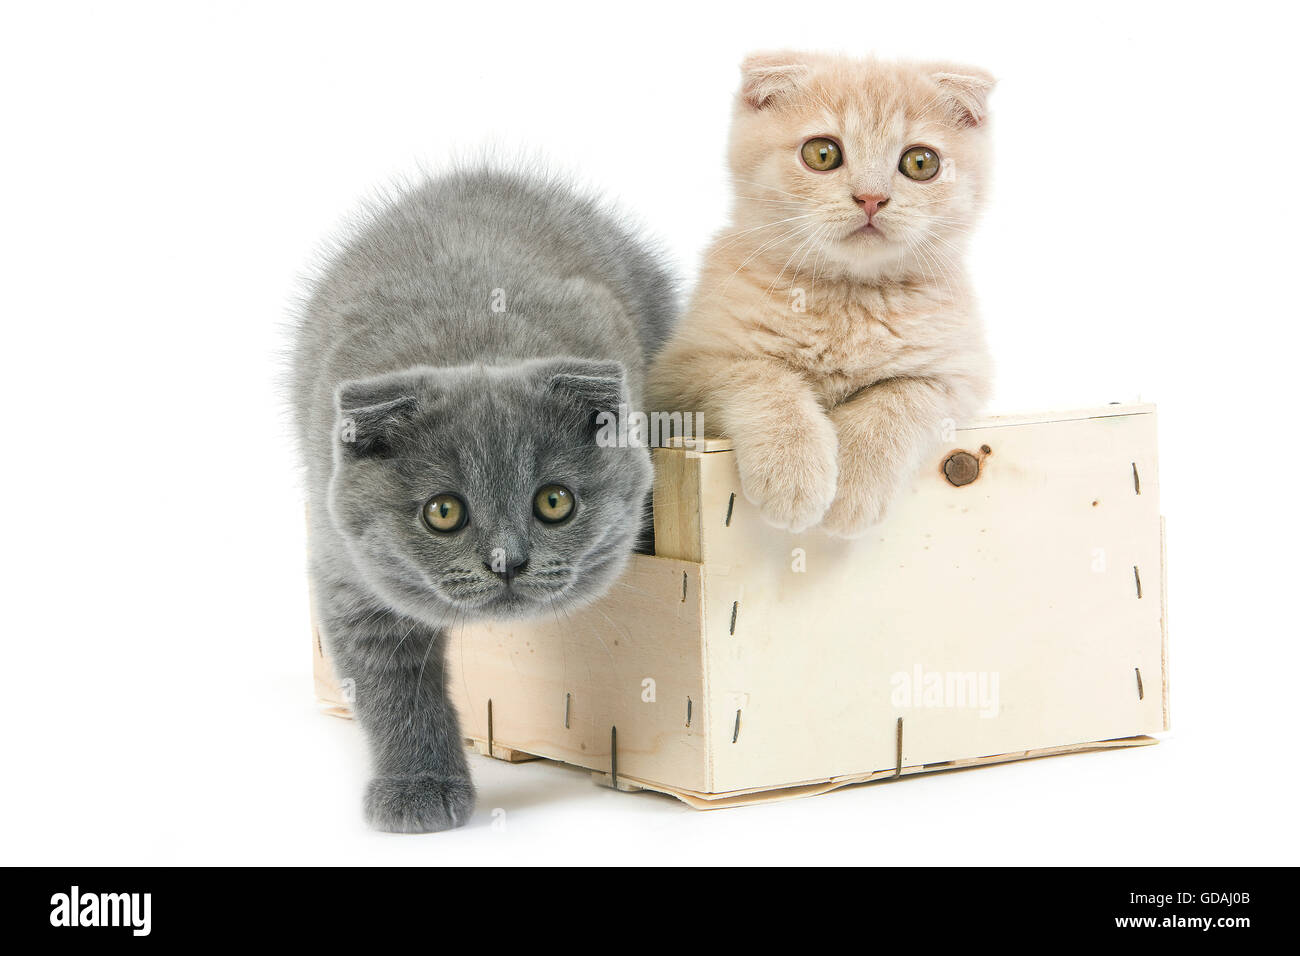 2 MONTHS OLD SCOTTISH FOLD CREAM AND BLUE KITTENS, PAIR PLAYING IN BASKET Stock Photo